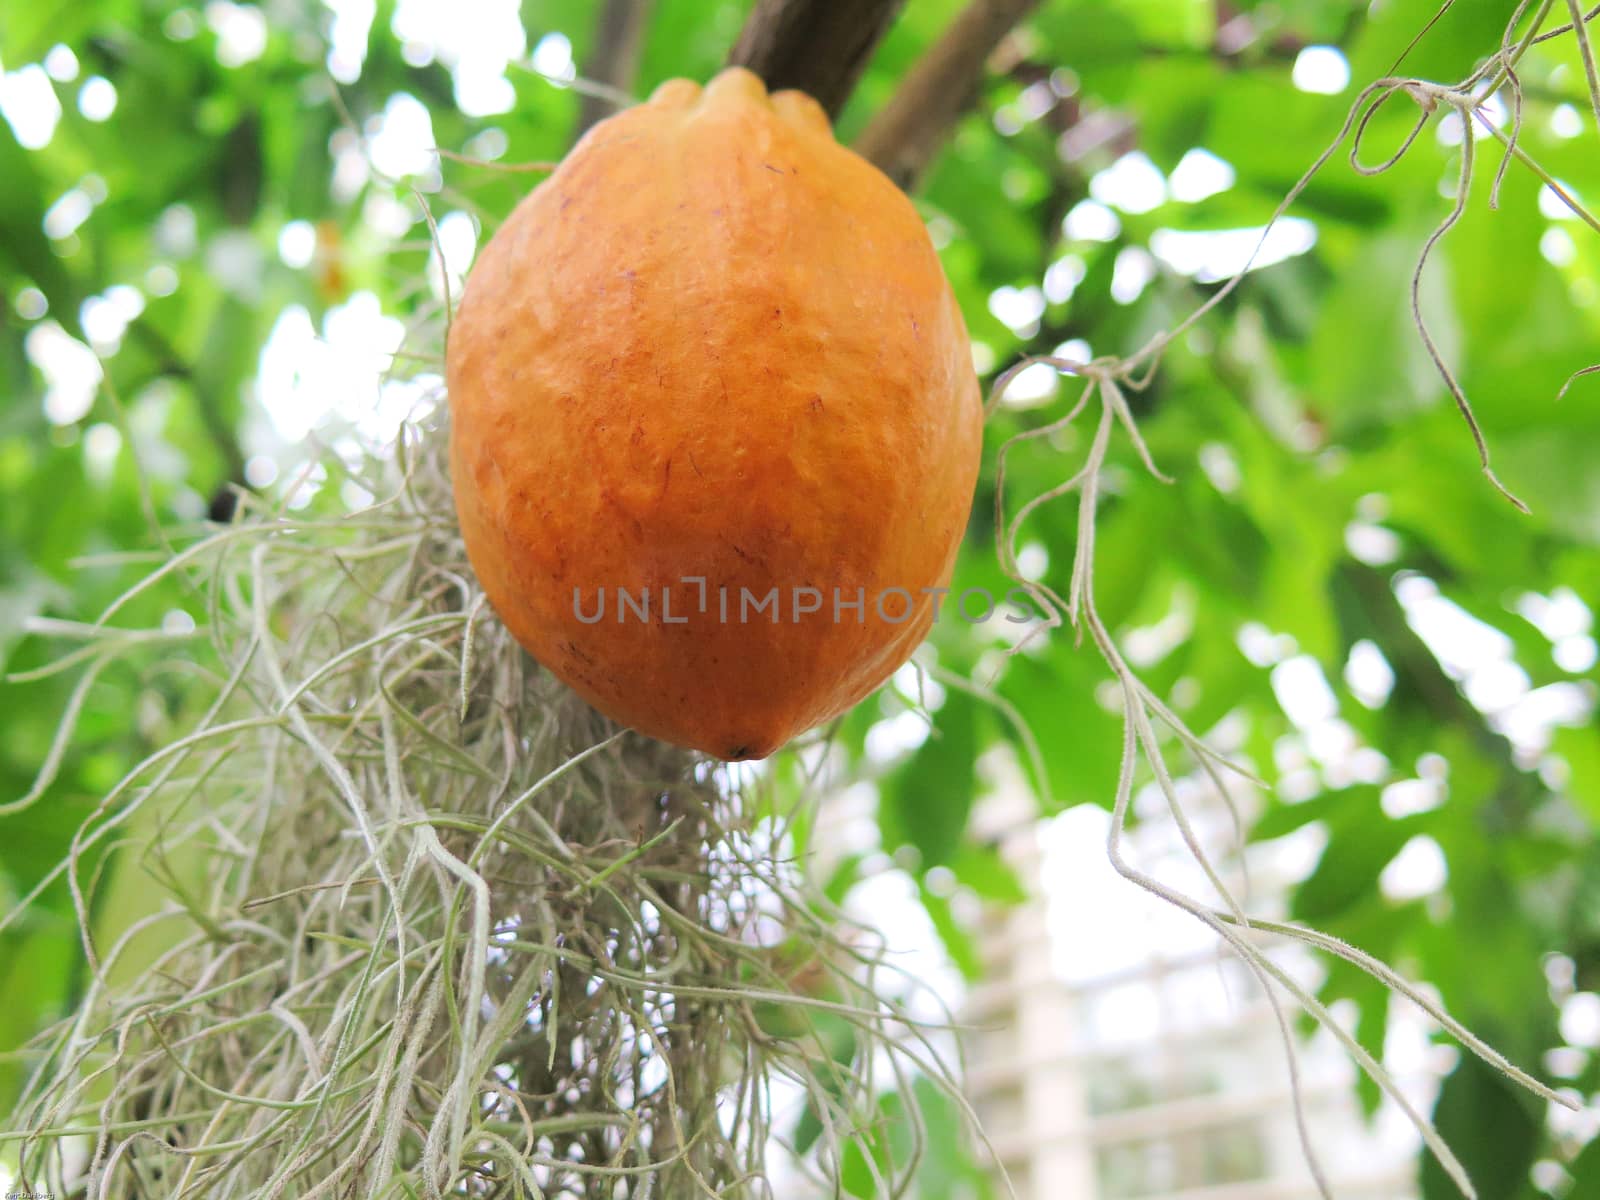 one orange and lovely cocoa bean hanging in the tree